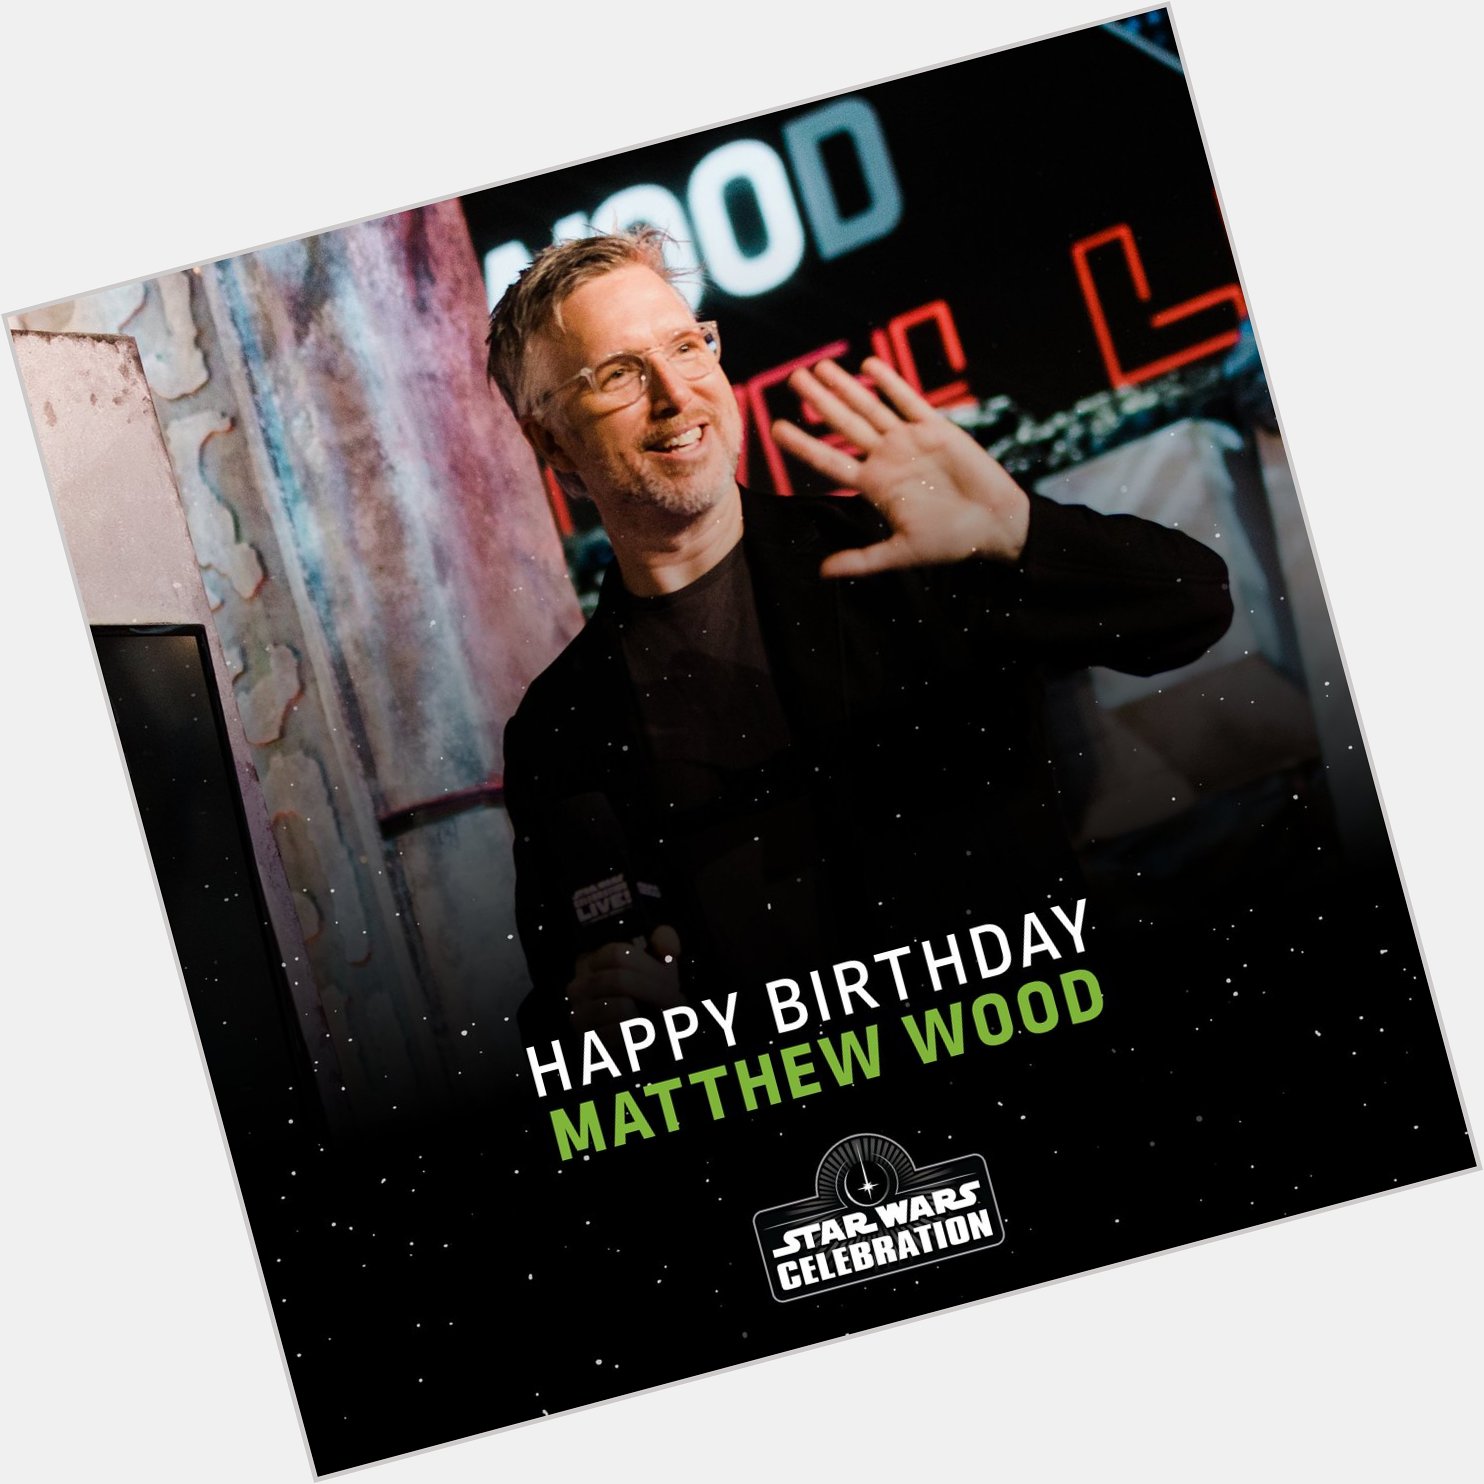 Wishing a happy birthday to Matthew Wood, incredible sound designer and voice of General Grievous! 